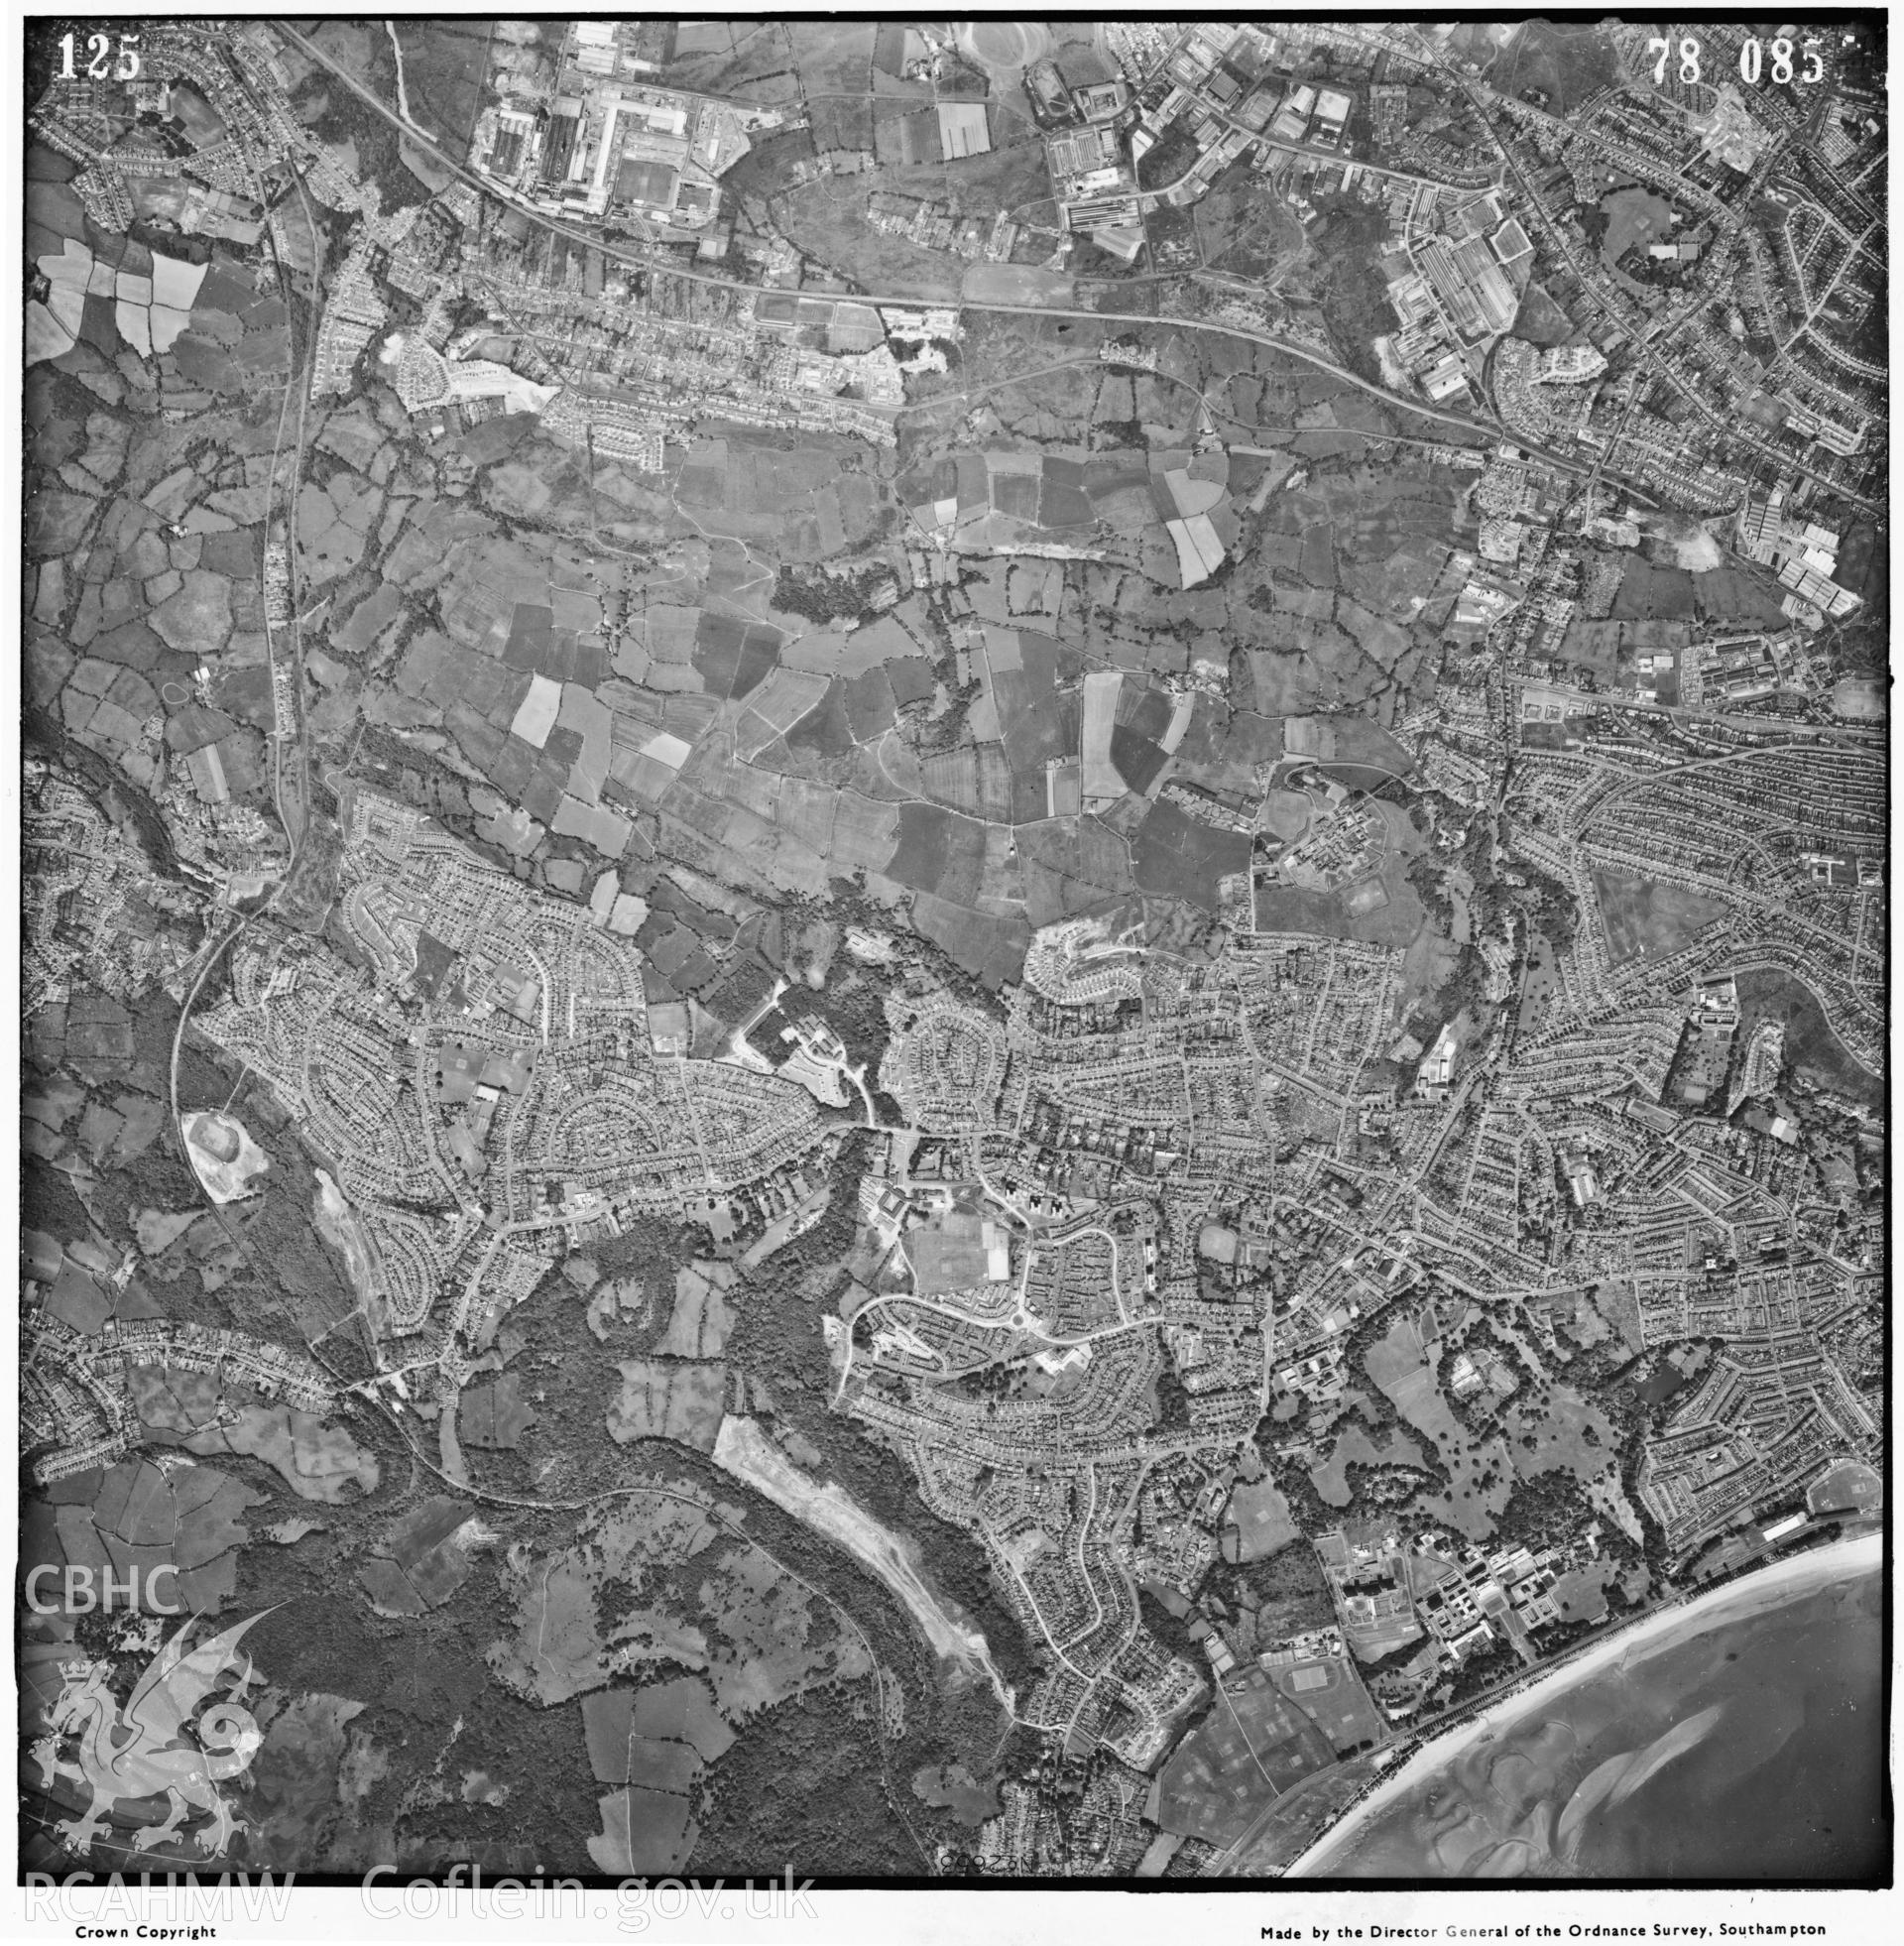 Digitized copy of an aerial photograph showing the Carn Glas area, taken by Ordnance Survey, 1971.